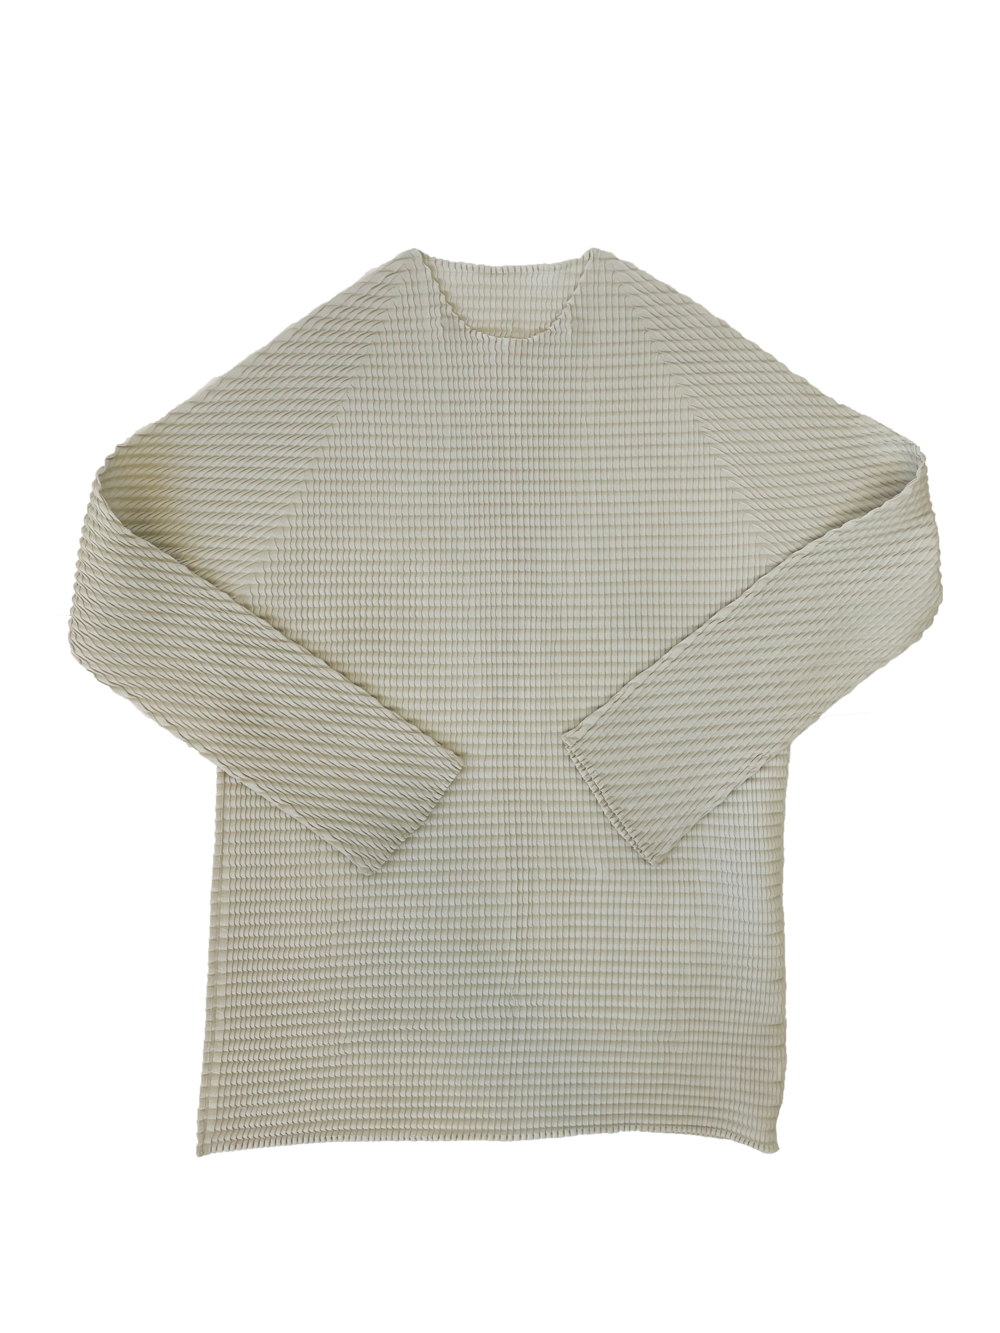 Issey Miyake Pleats Please Long Sleeve — quell